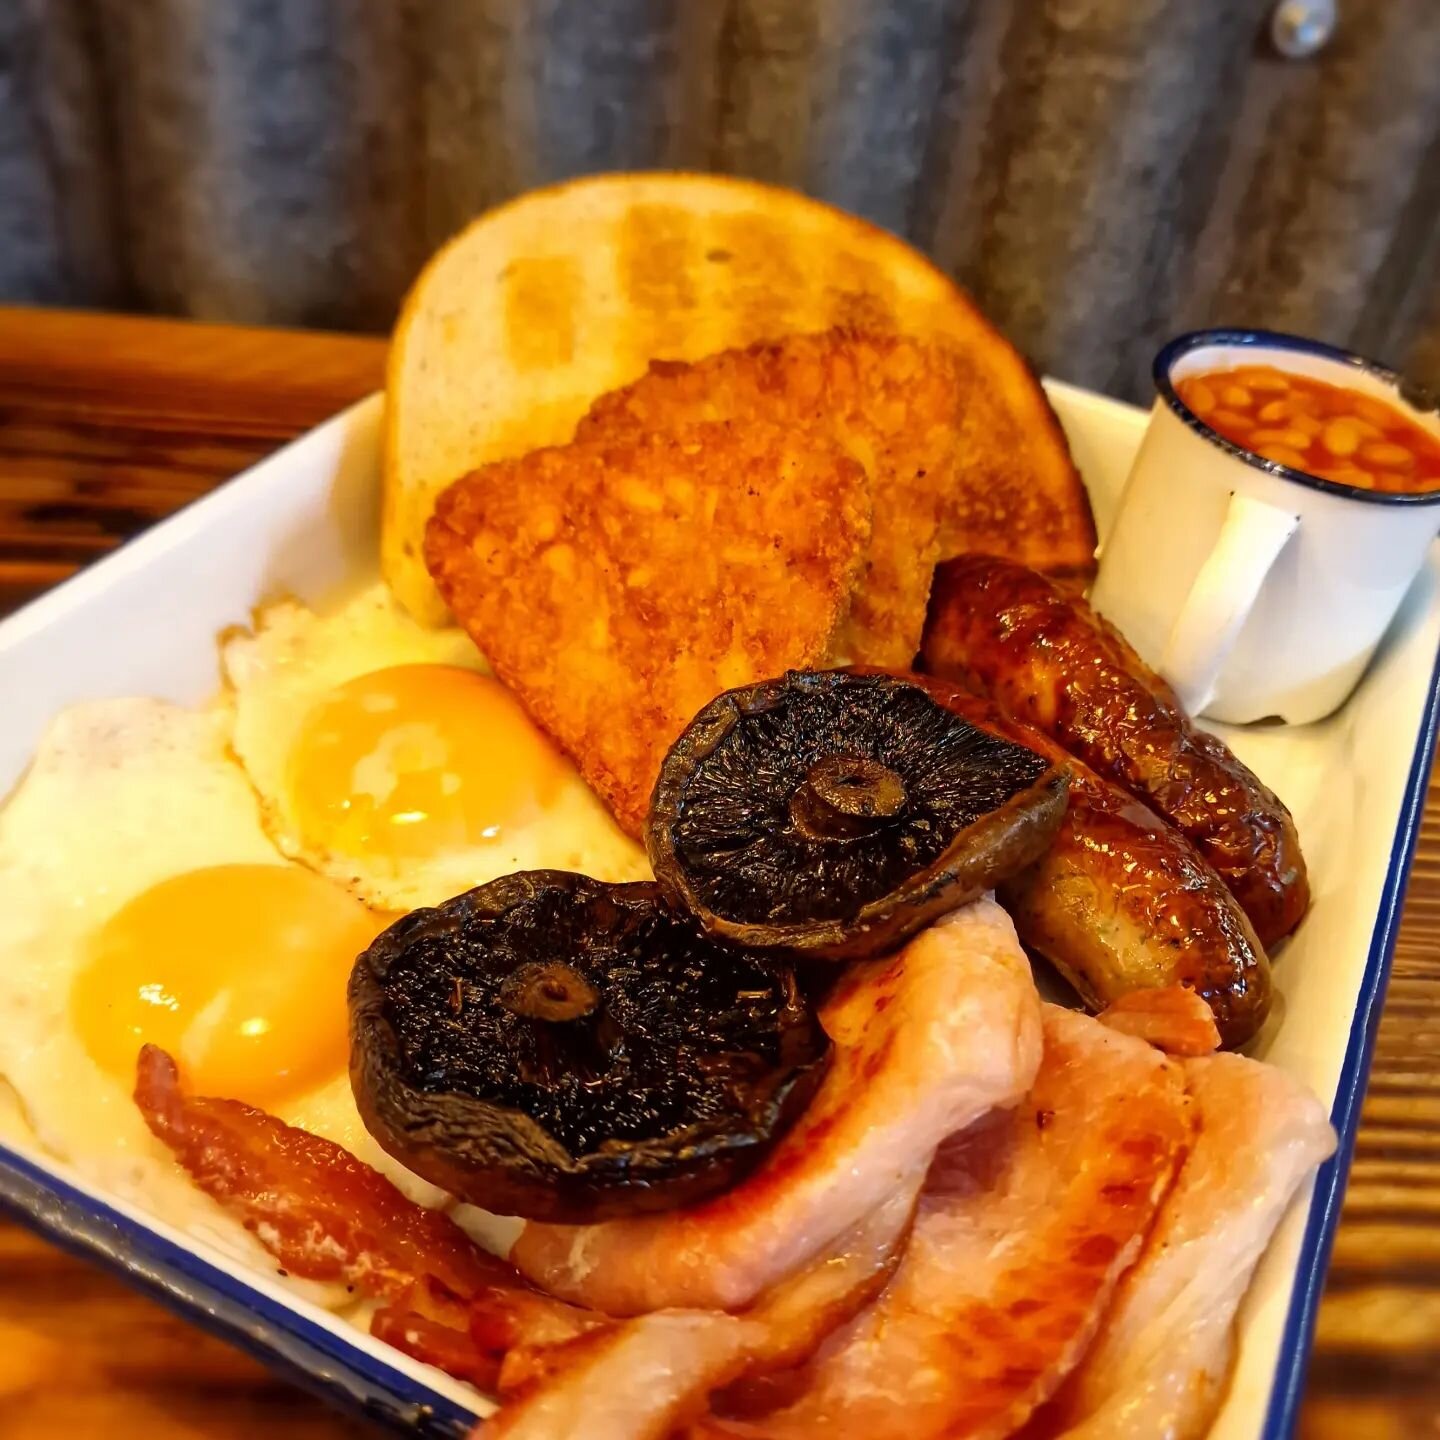 Now that's what we call a breakfast🍳

Available all day, everyday day! 

To book a table, visit our website www.thedovecoteeatery.co.uk

#breakfast #fullenglish #allday #British #Heinz #goodfood